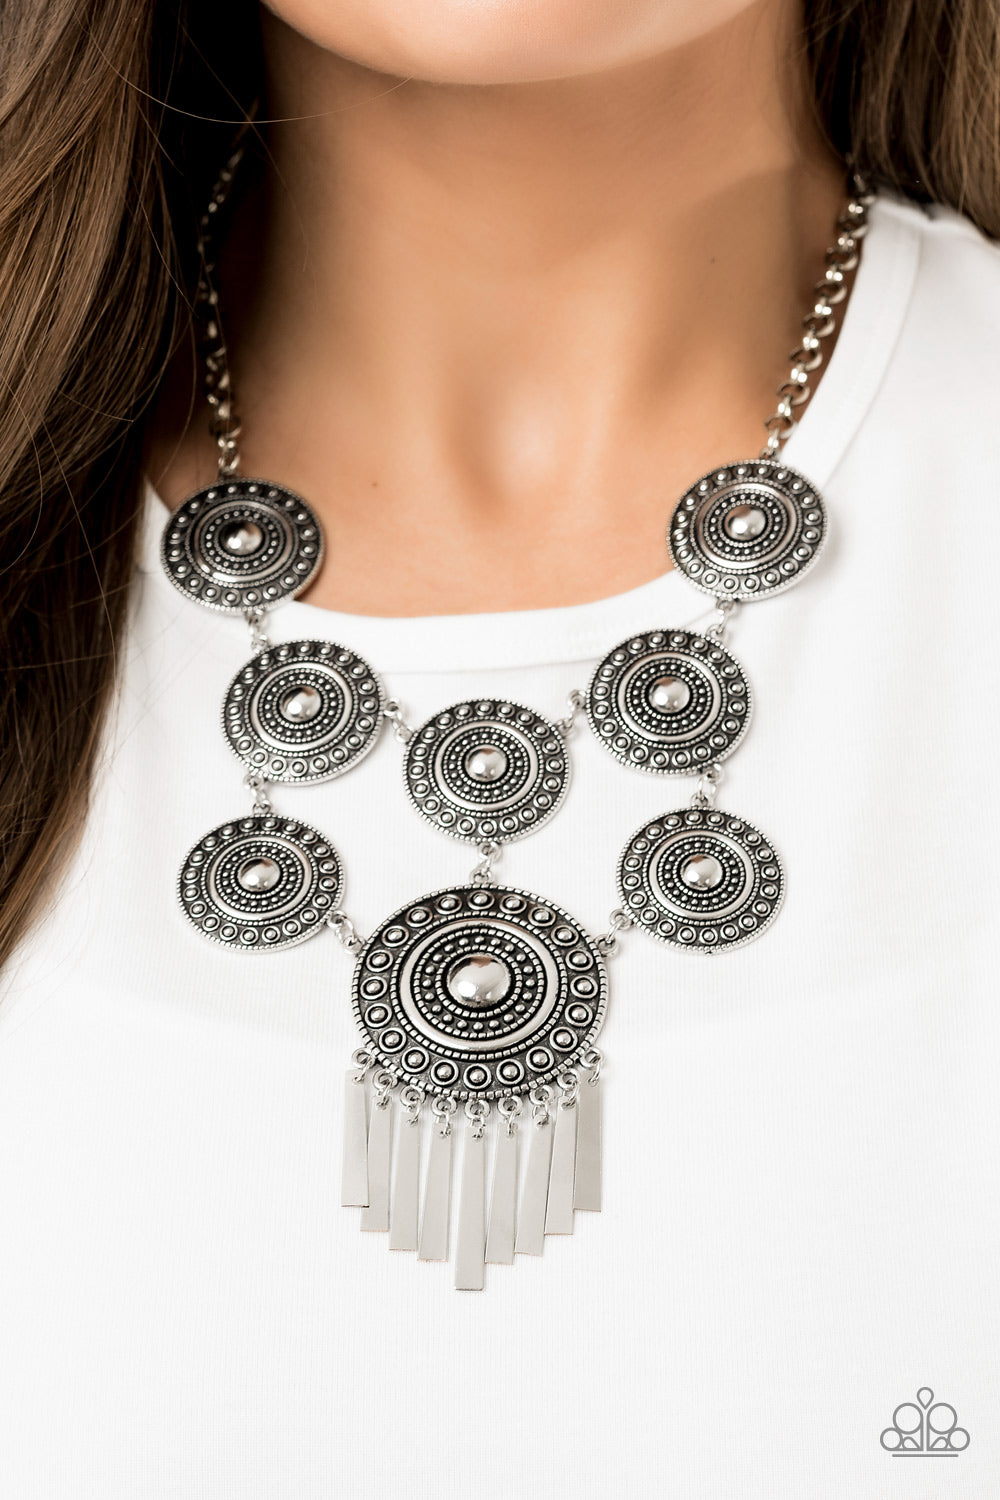 MODERN MEDALIST - SILVER SHIELDS AND FRINGE NECKLACE